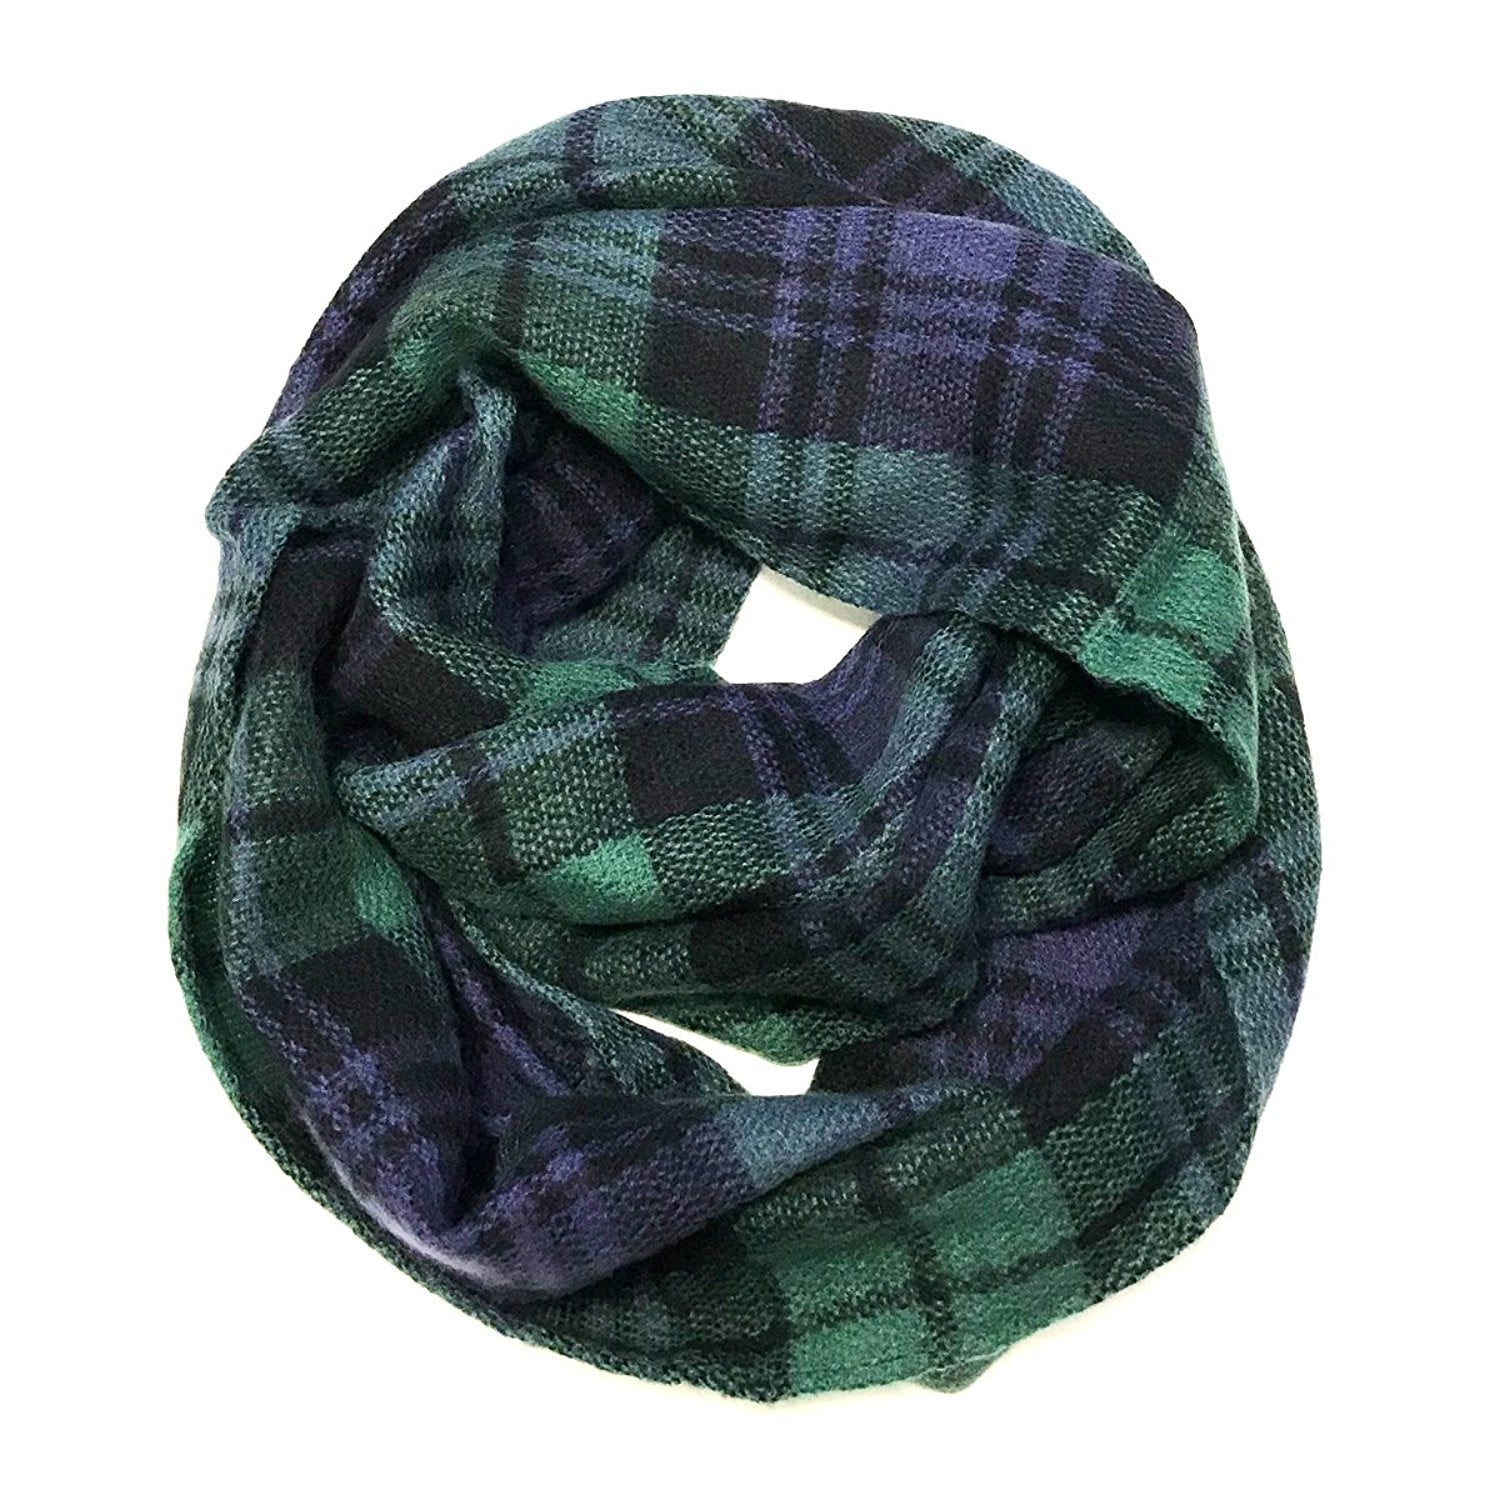 Plaid Winter Warm Infinity Scarves (Variety of styles)